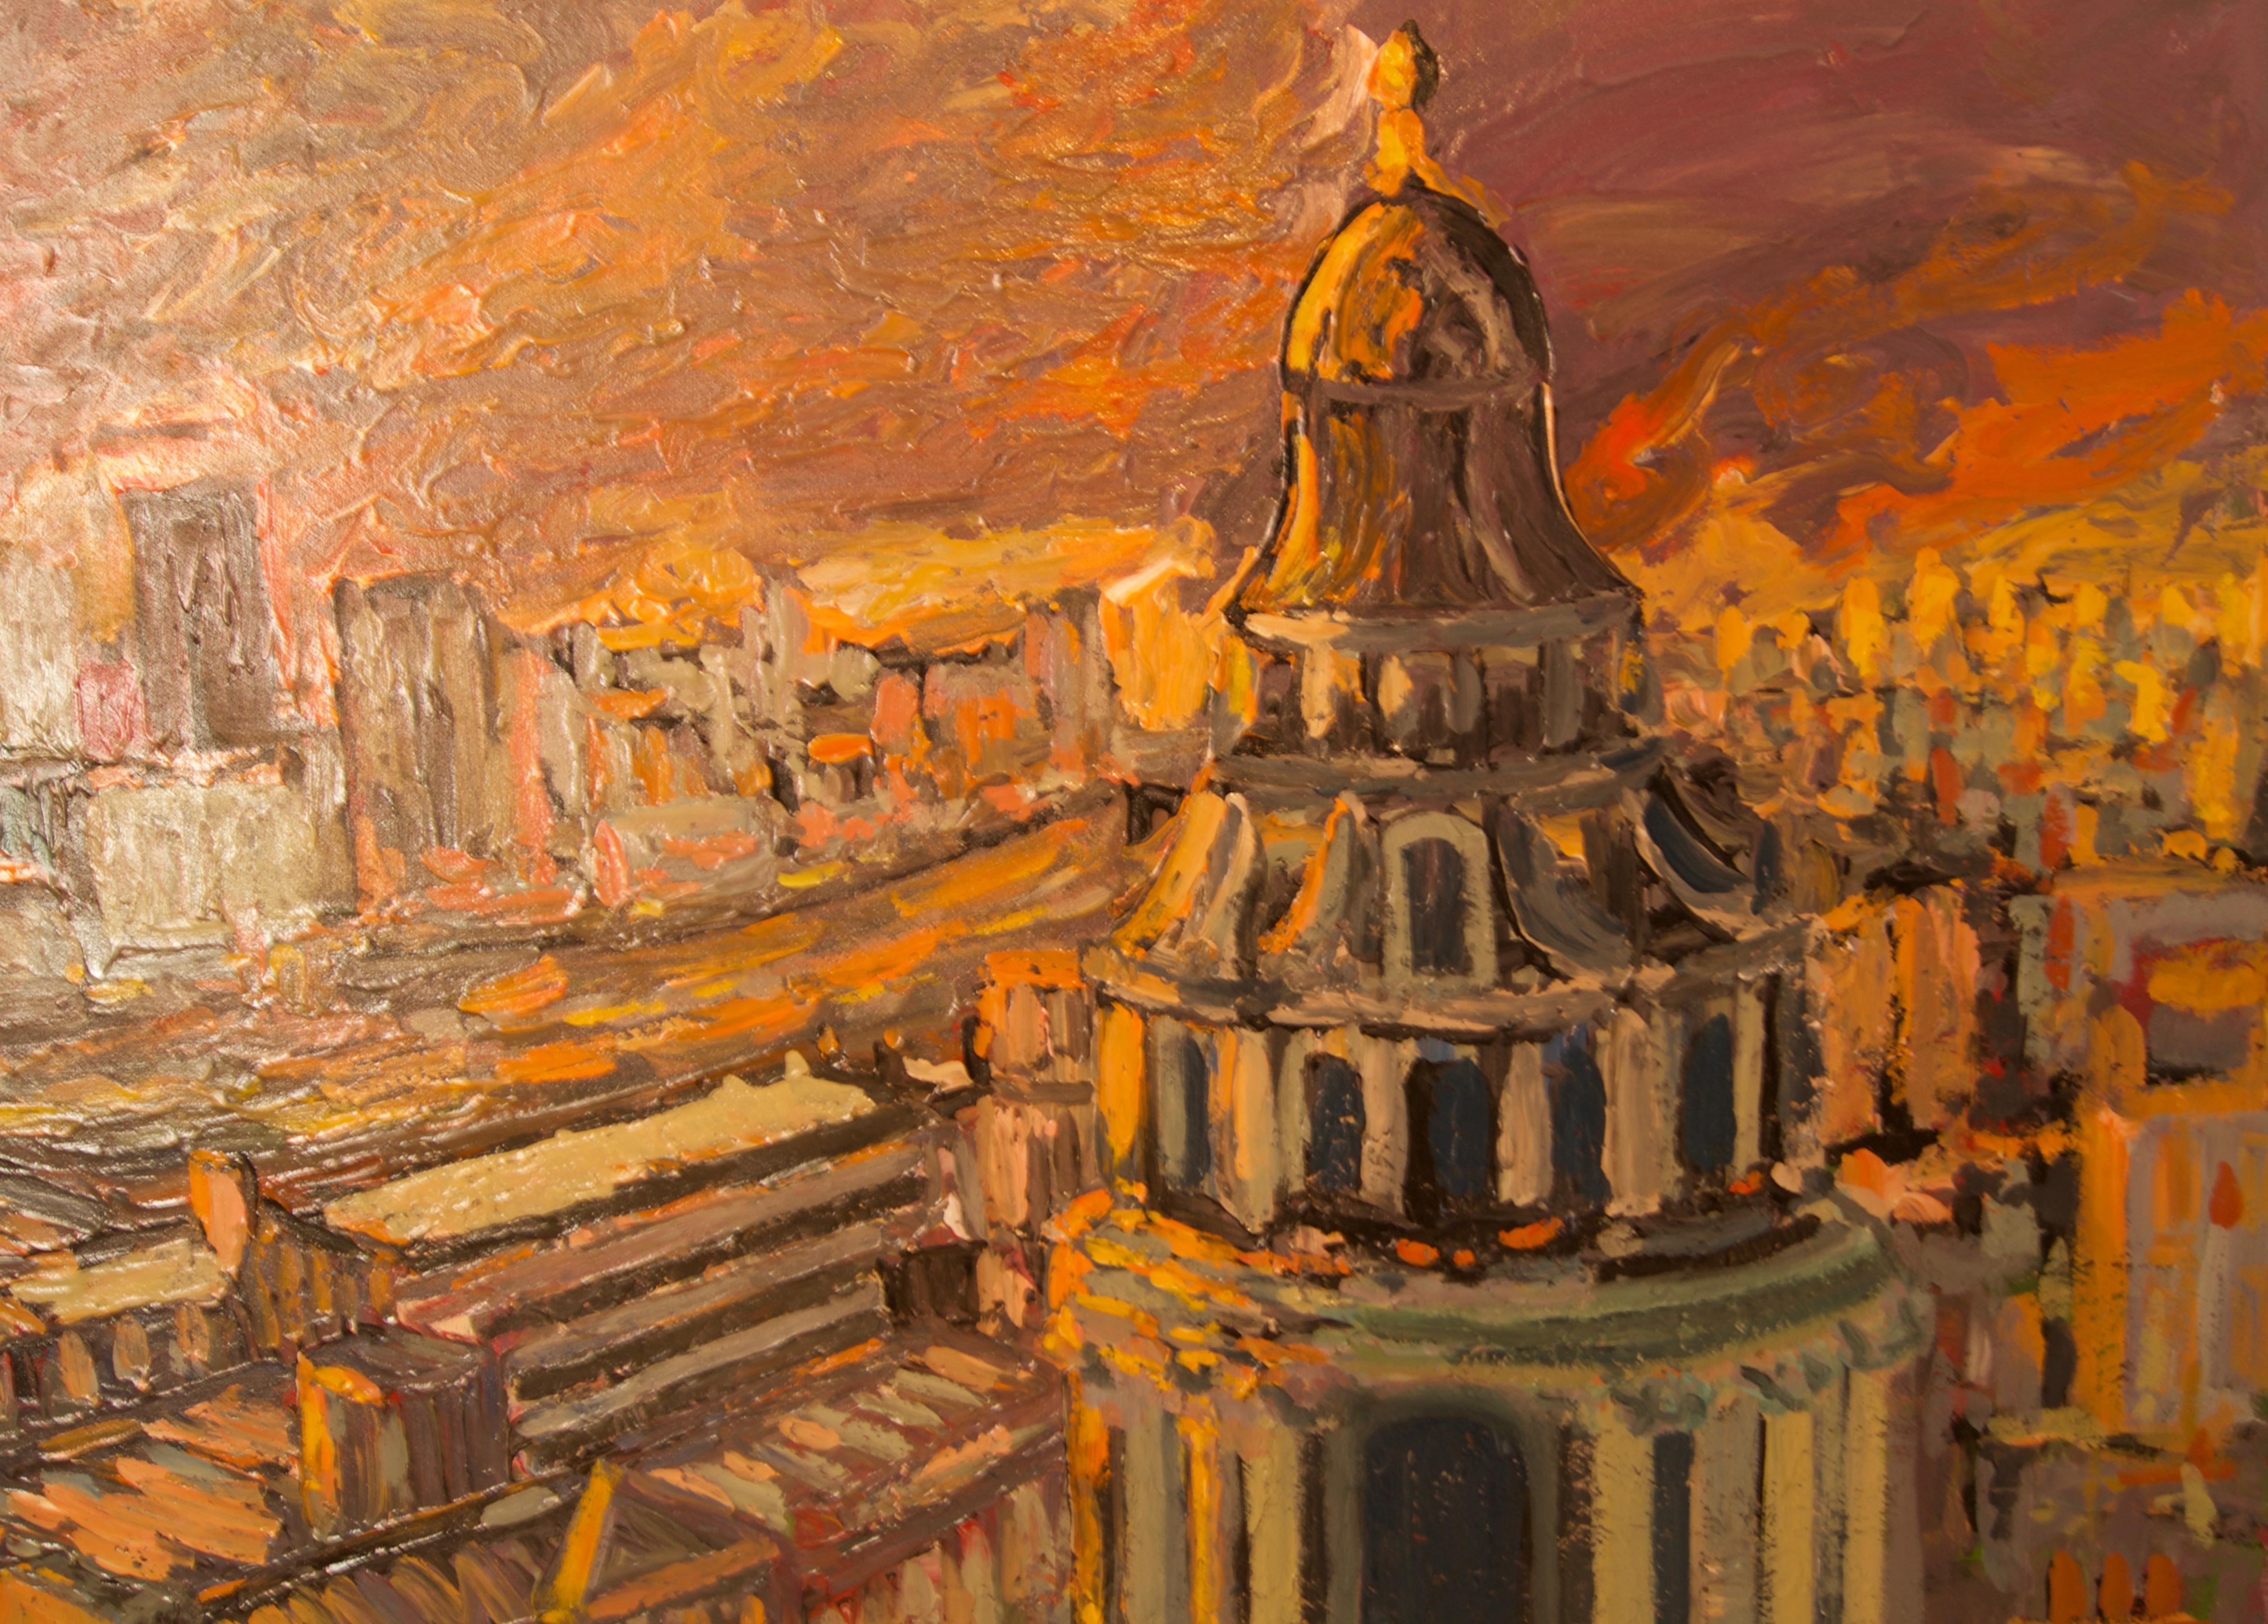 Sunset over London - Late 20th Century Impressionist Acrylic Landscape - Quirke - Post-Impressionist Painting by Michael Quirke